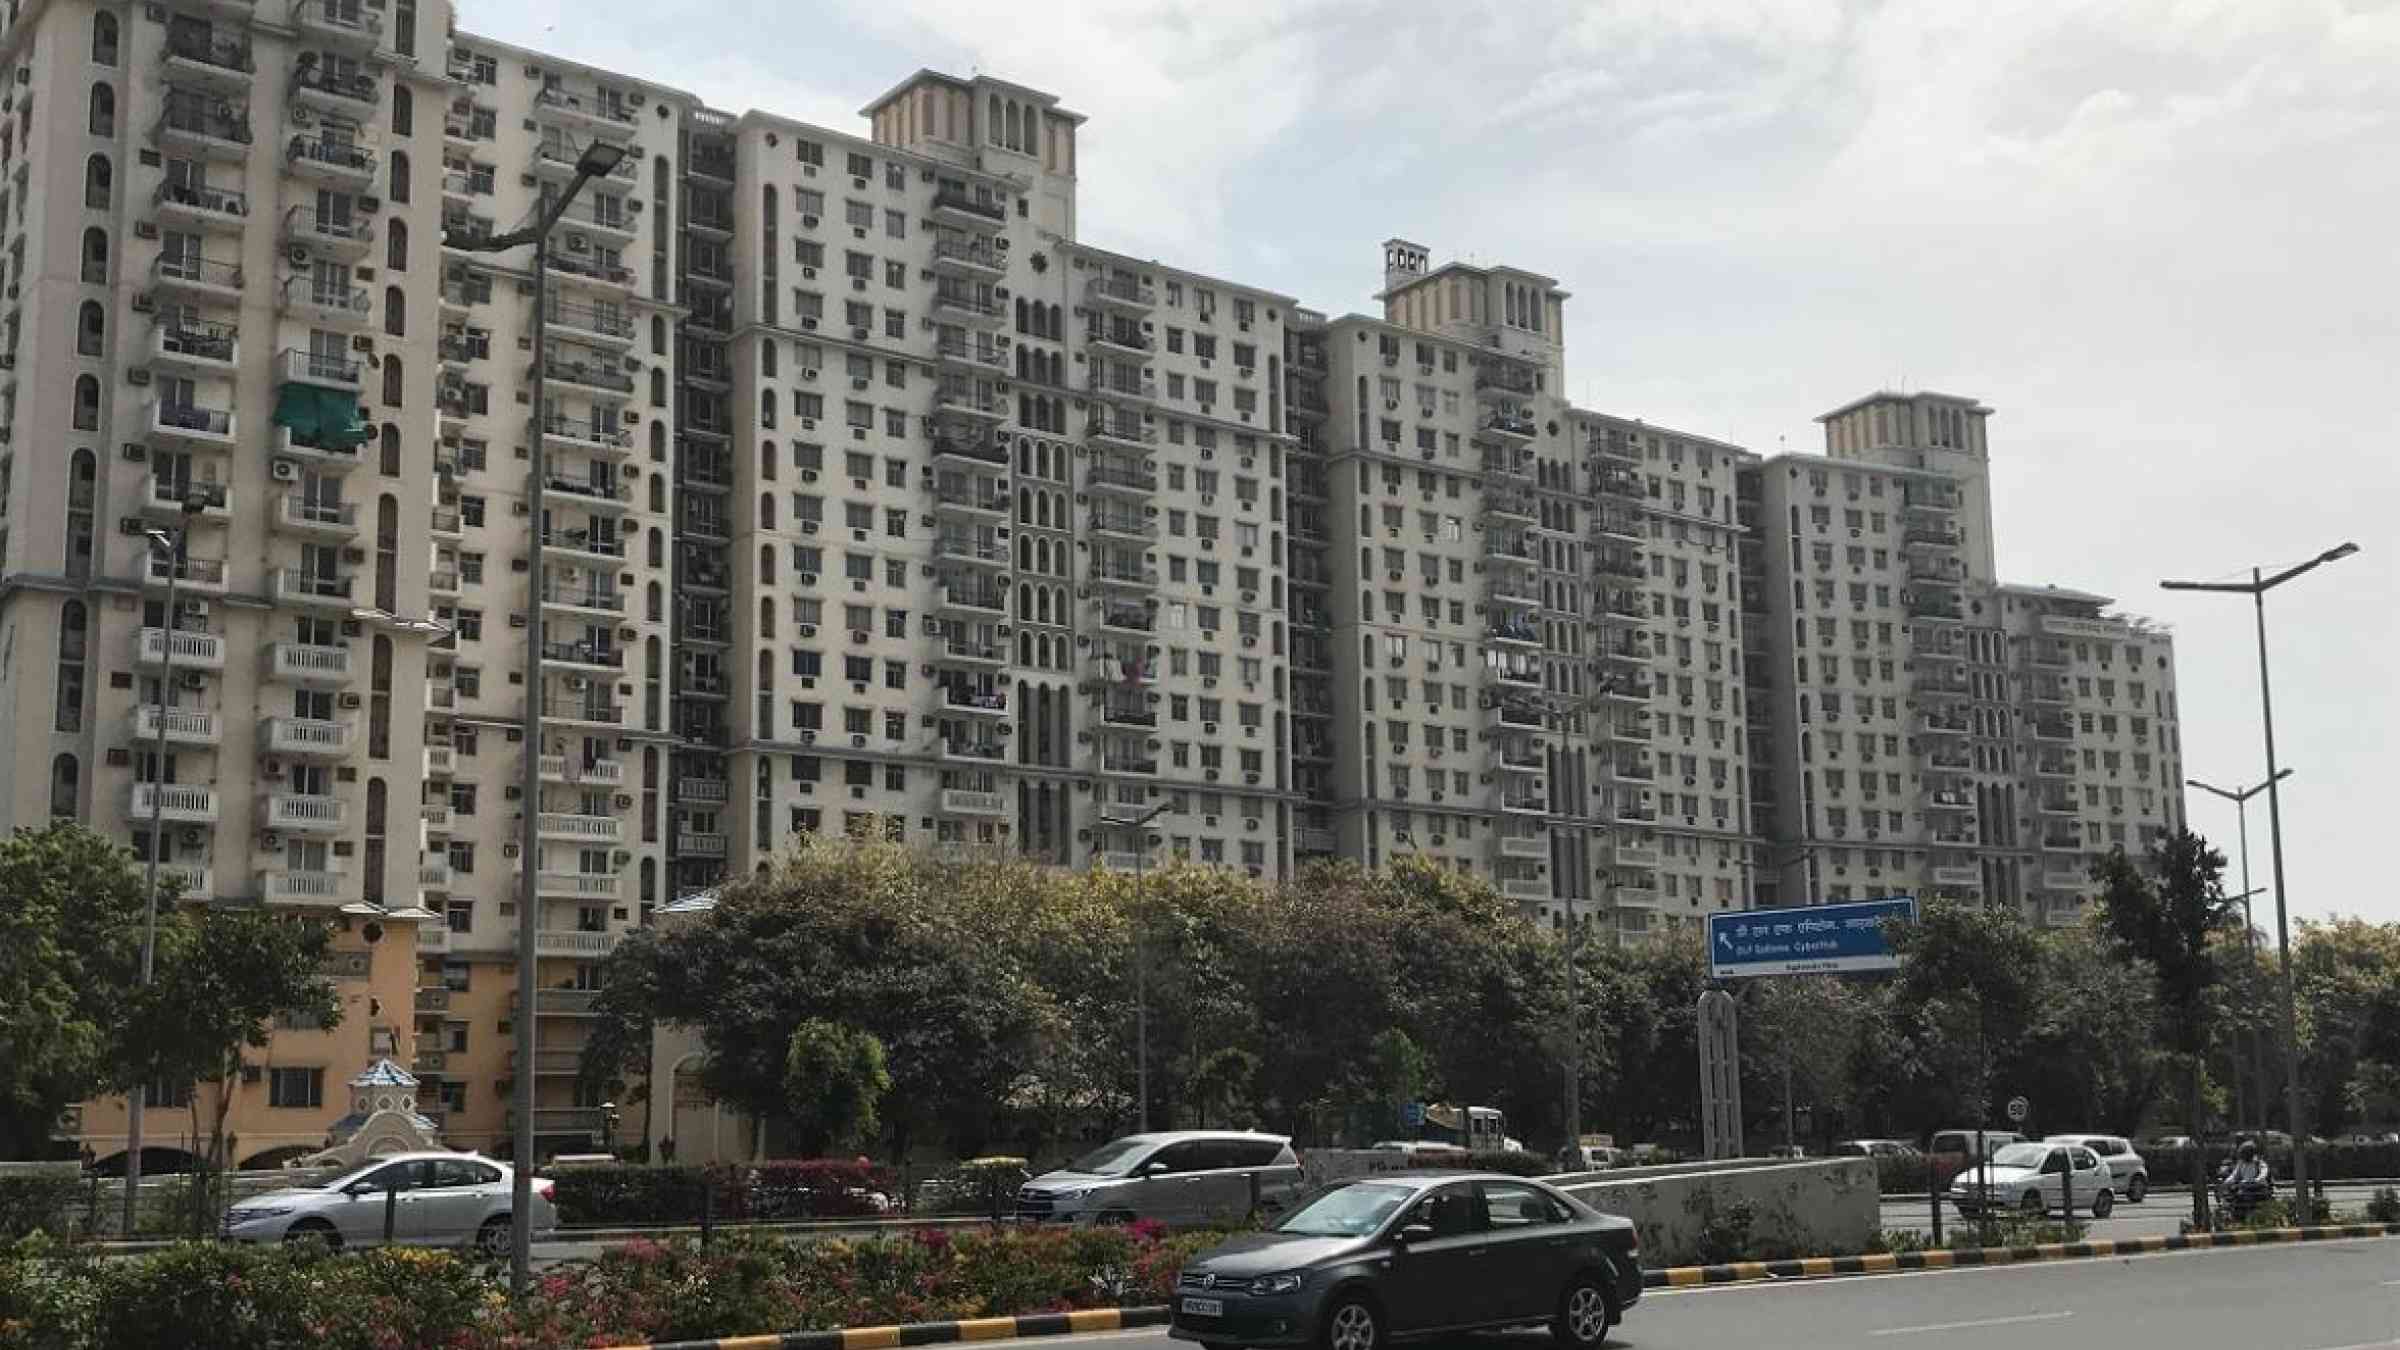 A view of high rise apartment blocks in Delhi with a "soft storey" for parking on the ground floor making them more vulnerable to earthquakes